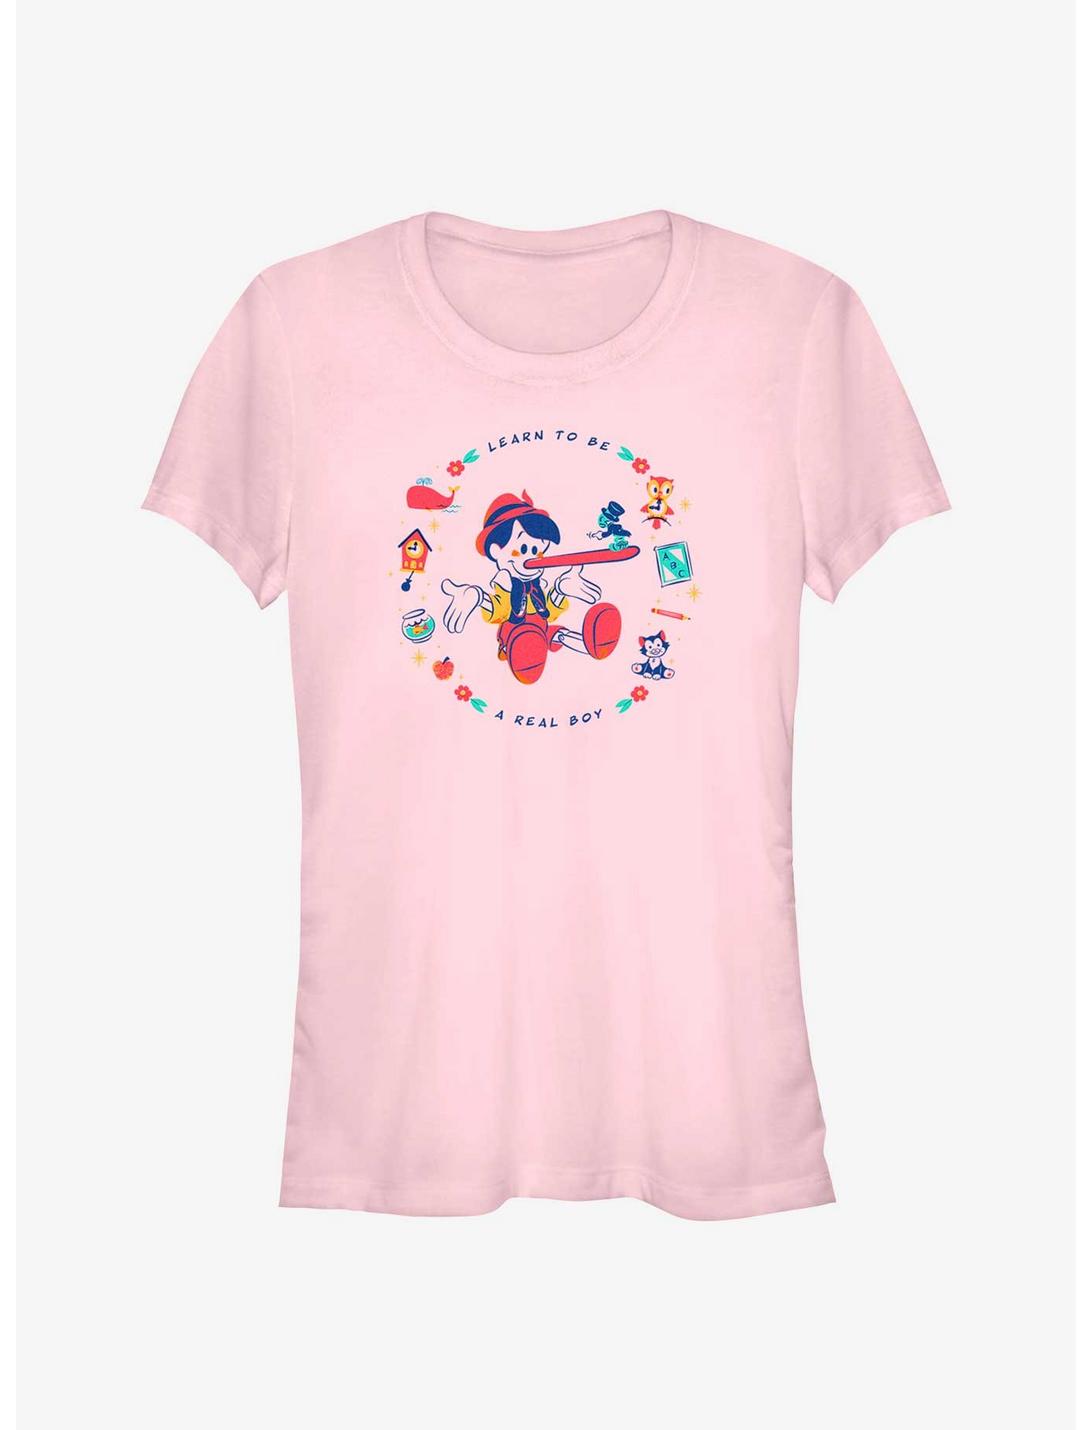 Disney Pinocchio Learn To Be A Real Boy Girls T-Shirt, LIGHT PINK, hi-res